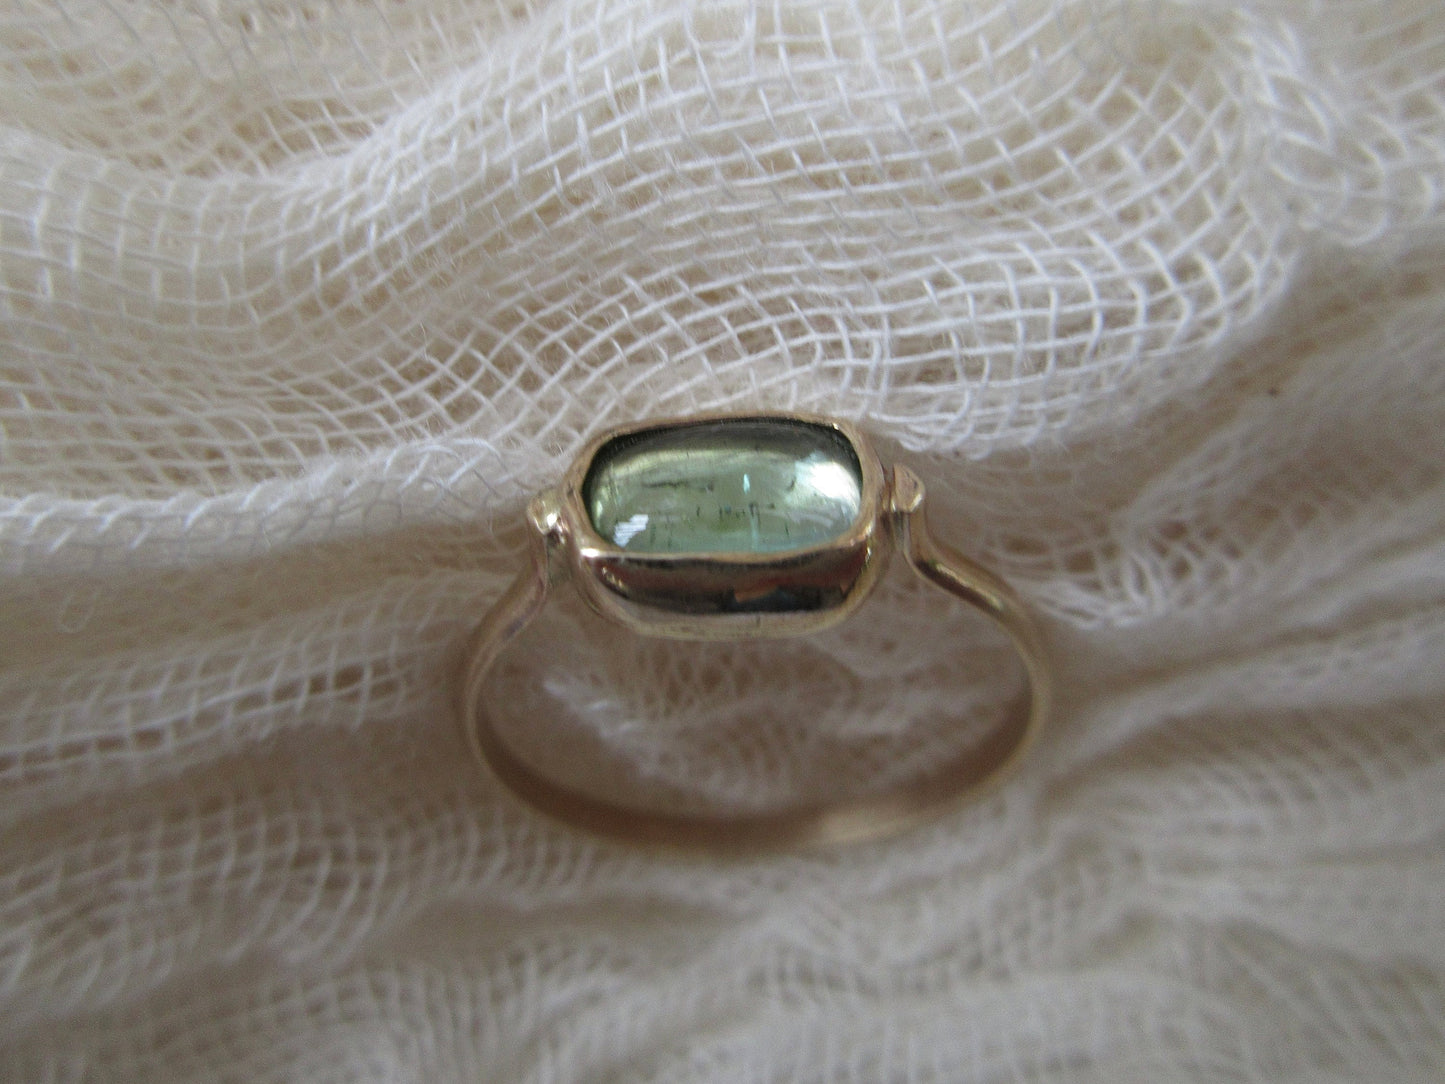 Candy ring in 14 karat gold with a light green tourmaline cabochon